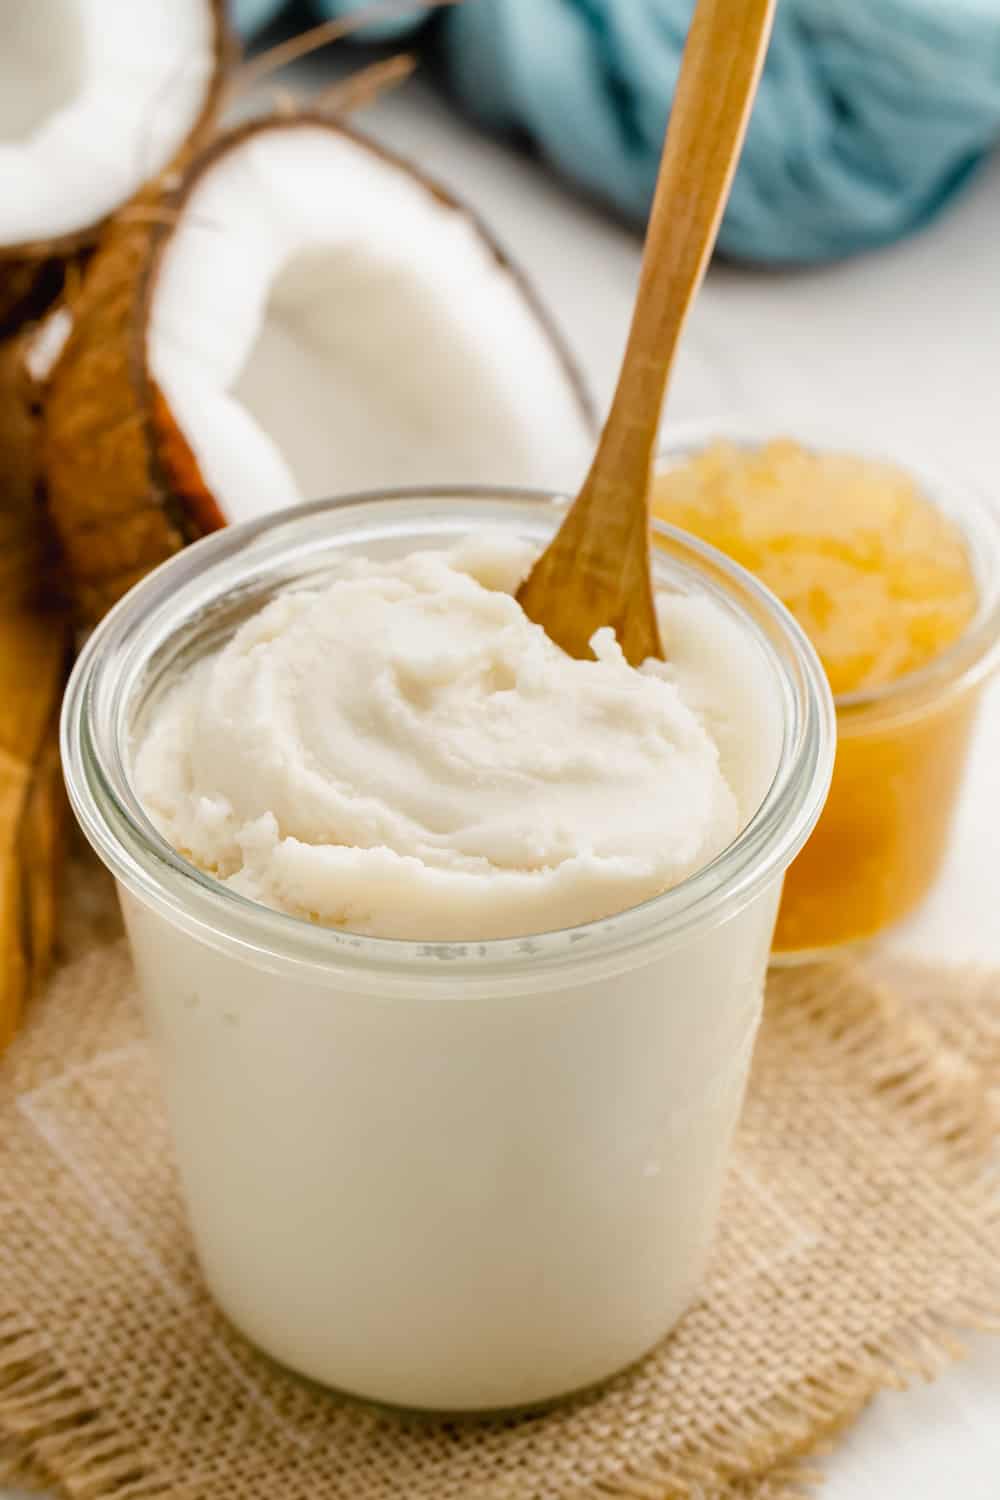 Coconut Butter Market Shows The possibility to Earn at $1.9 Billion, Asia-Pacific Can Be The market Leader